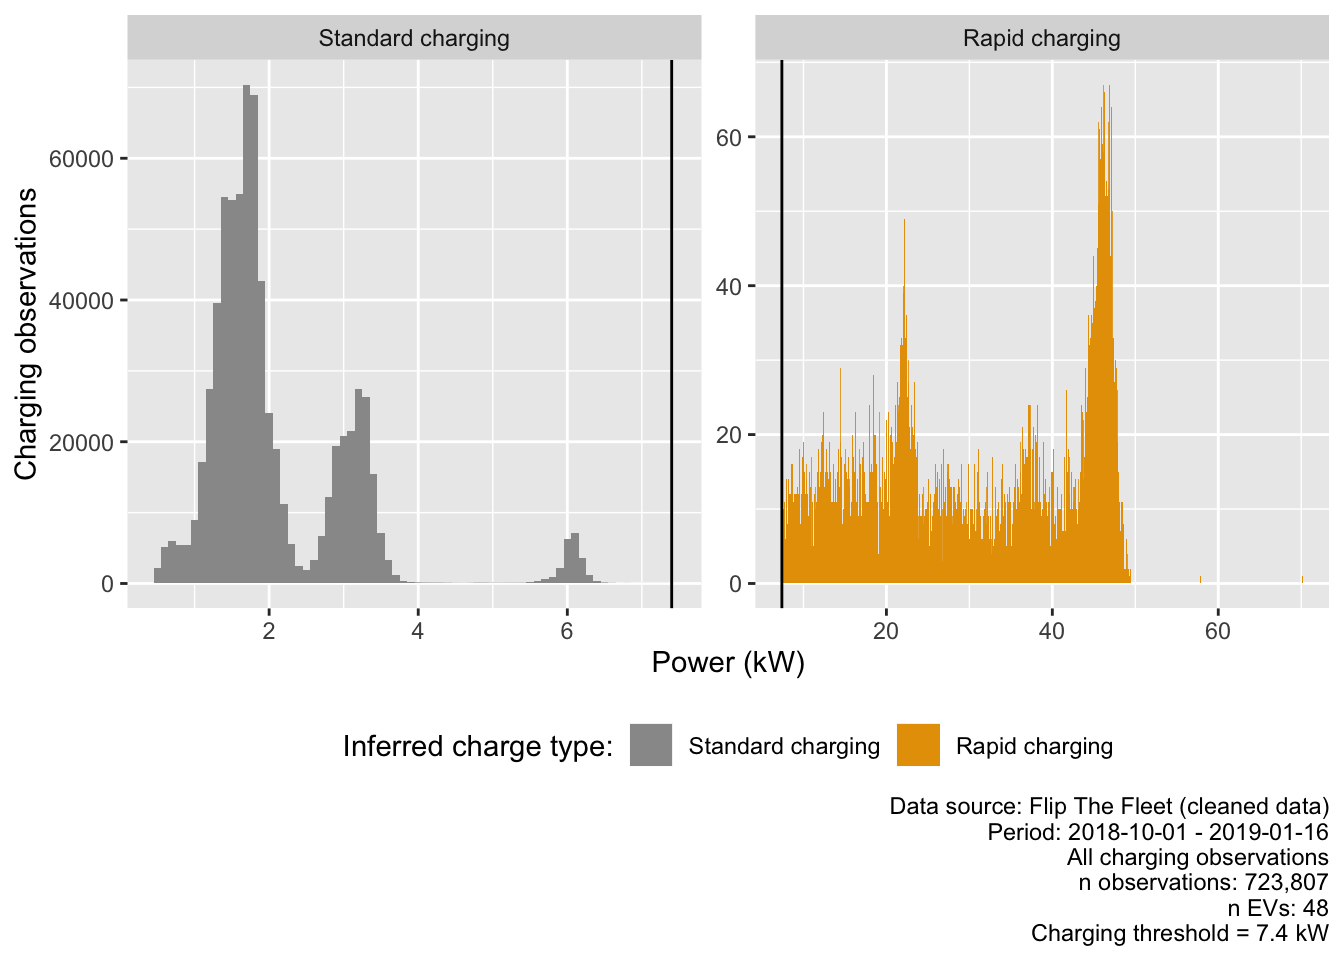 Observed power demand distribution by charge type where charging observed (standard vs rapid threshold shown as dark vertical line)